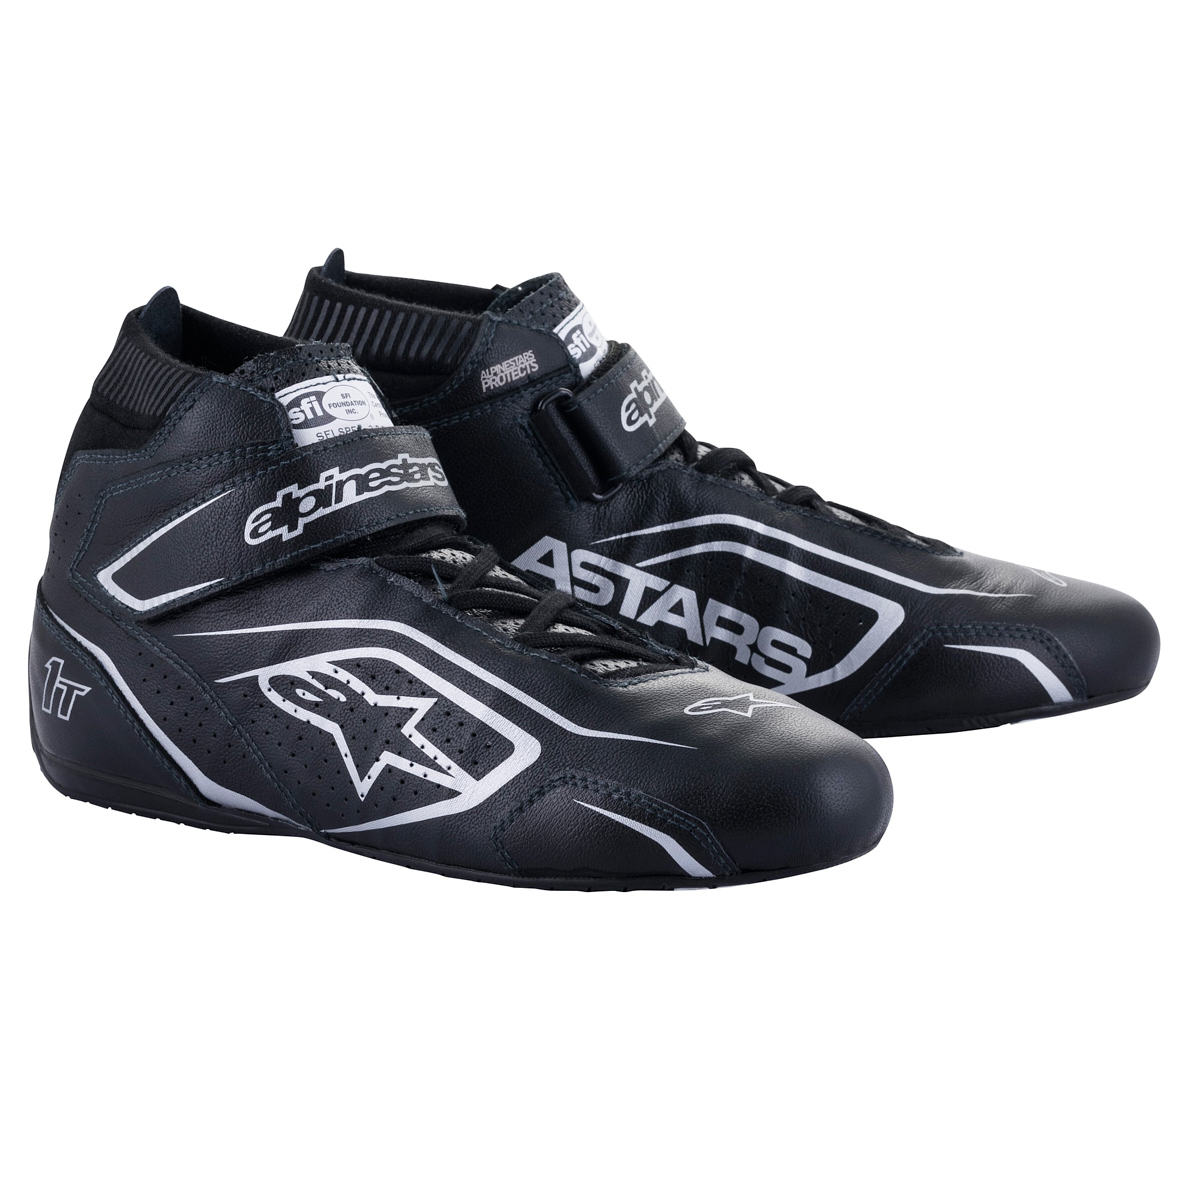 Alpinestars 2710122-119-7.5 Driving Shoe, Tech 1-T V3, Mid-Top, SFI 3.3, Leather Outer, Nomex Inner, Black / Silver, Size 7.5, Pair